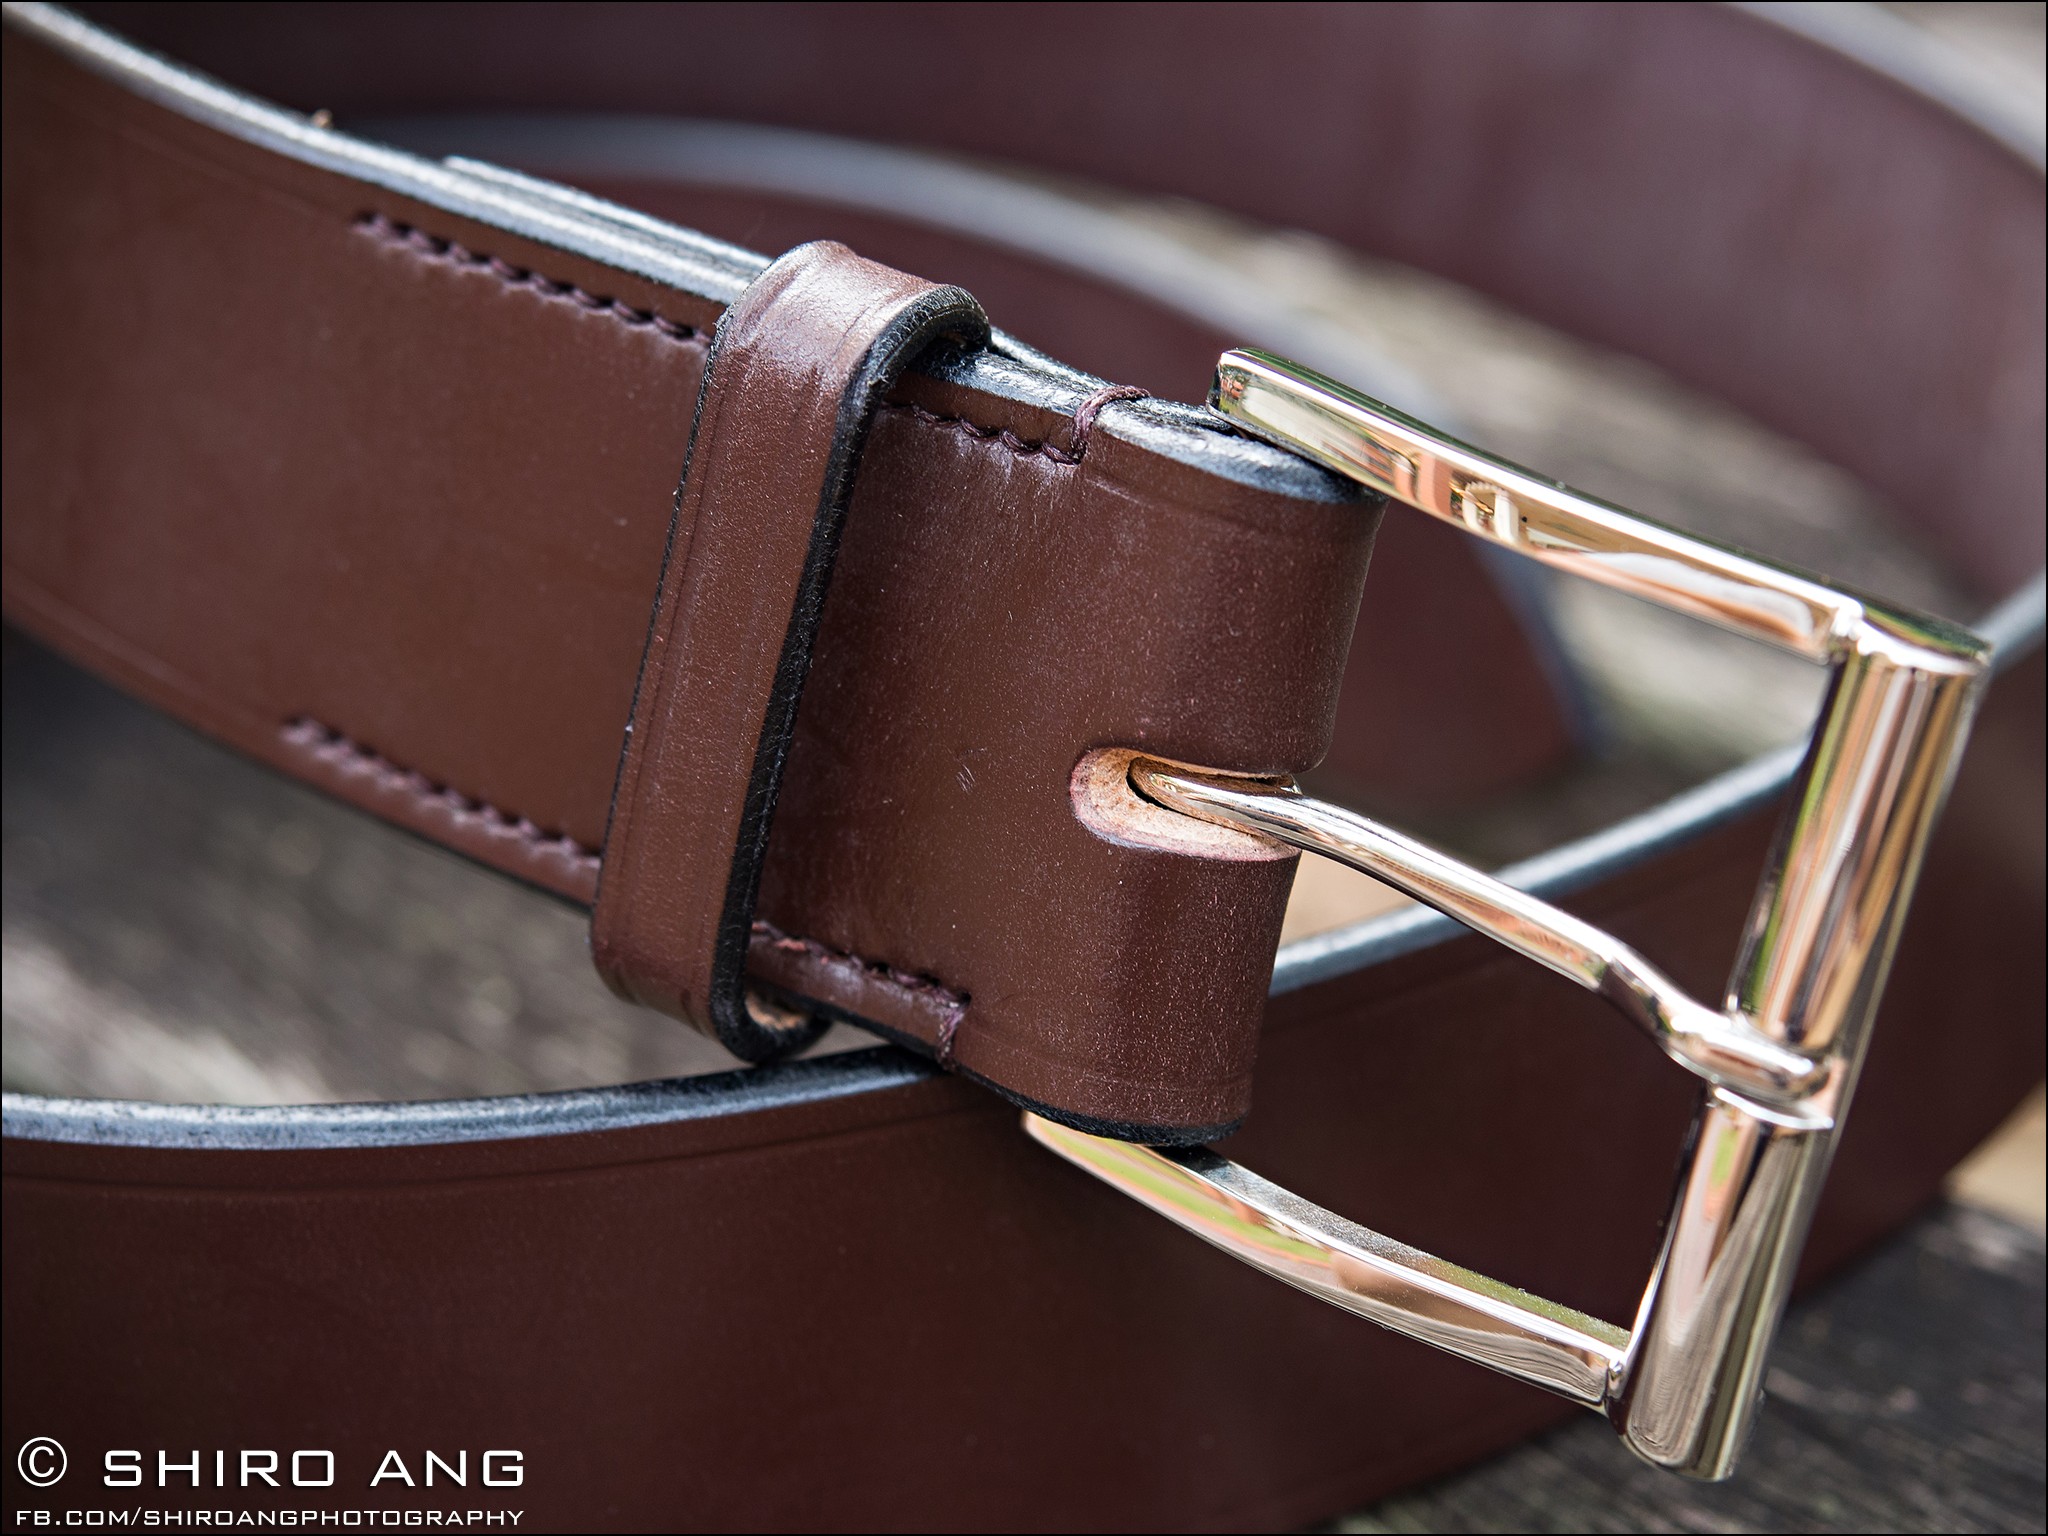 Equus Leather - English Handstitched Bridle Leather Belts - Official  Affiliate and Review Thread | Page 135 | Styleforum